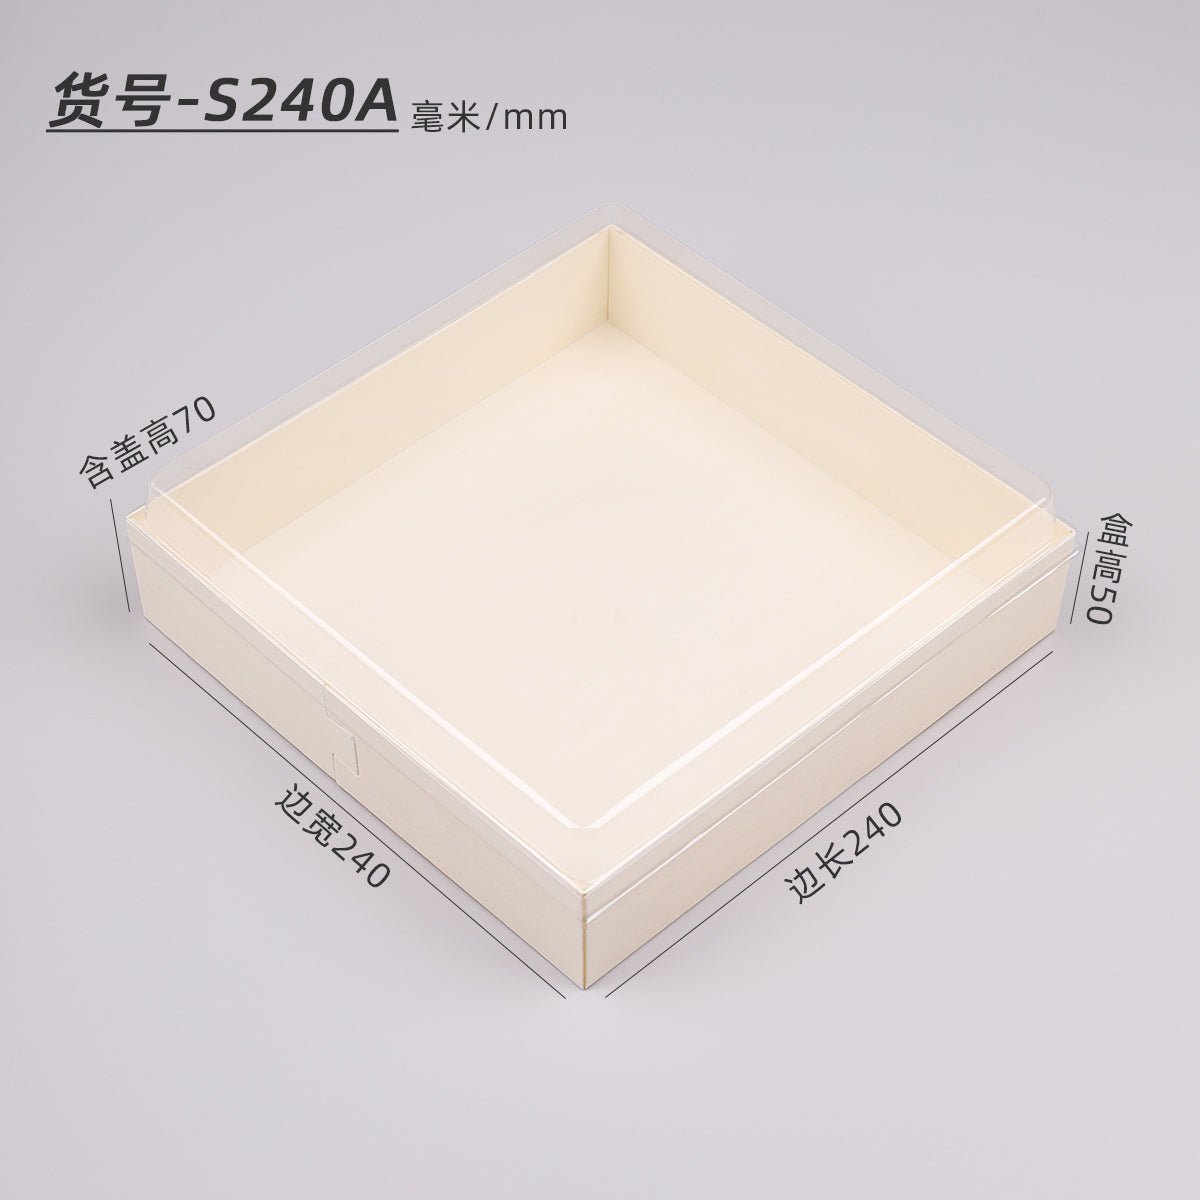 Sushi to-go box Japanese lunch box disposable sushi box wooden lunch box sashimi take-out box commercial packaging box - CokMaster